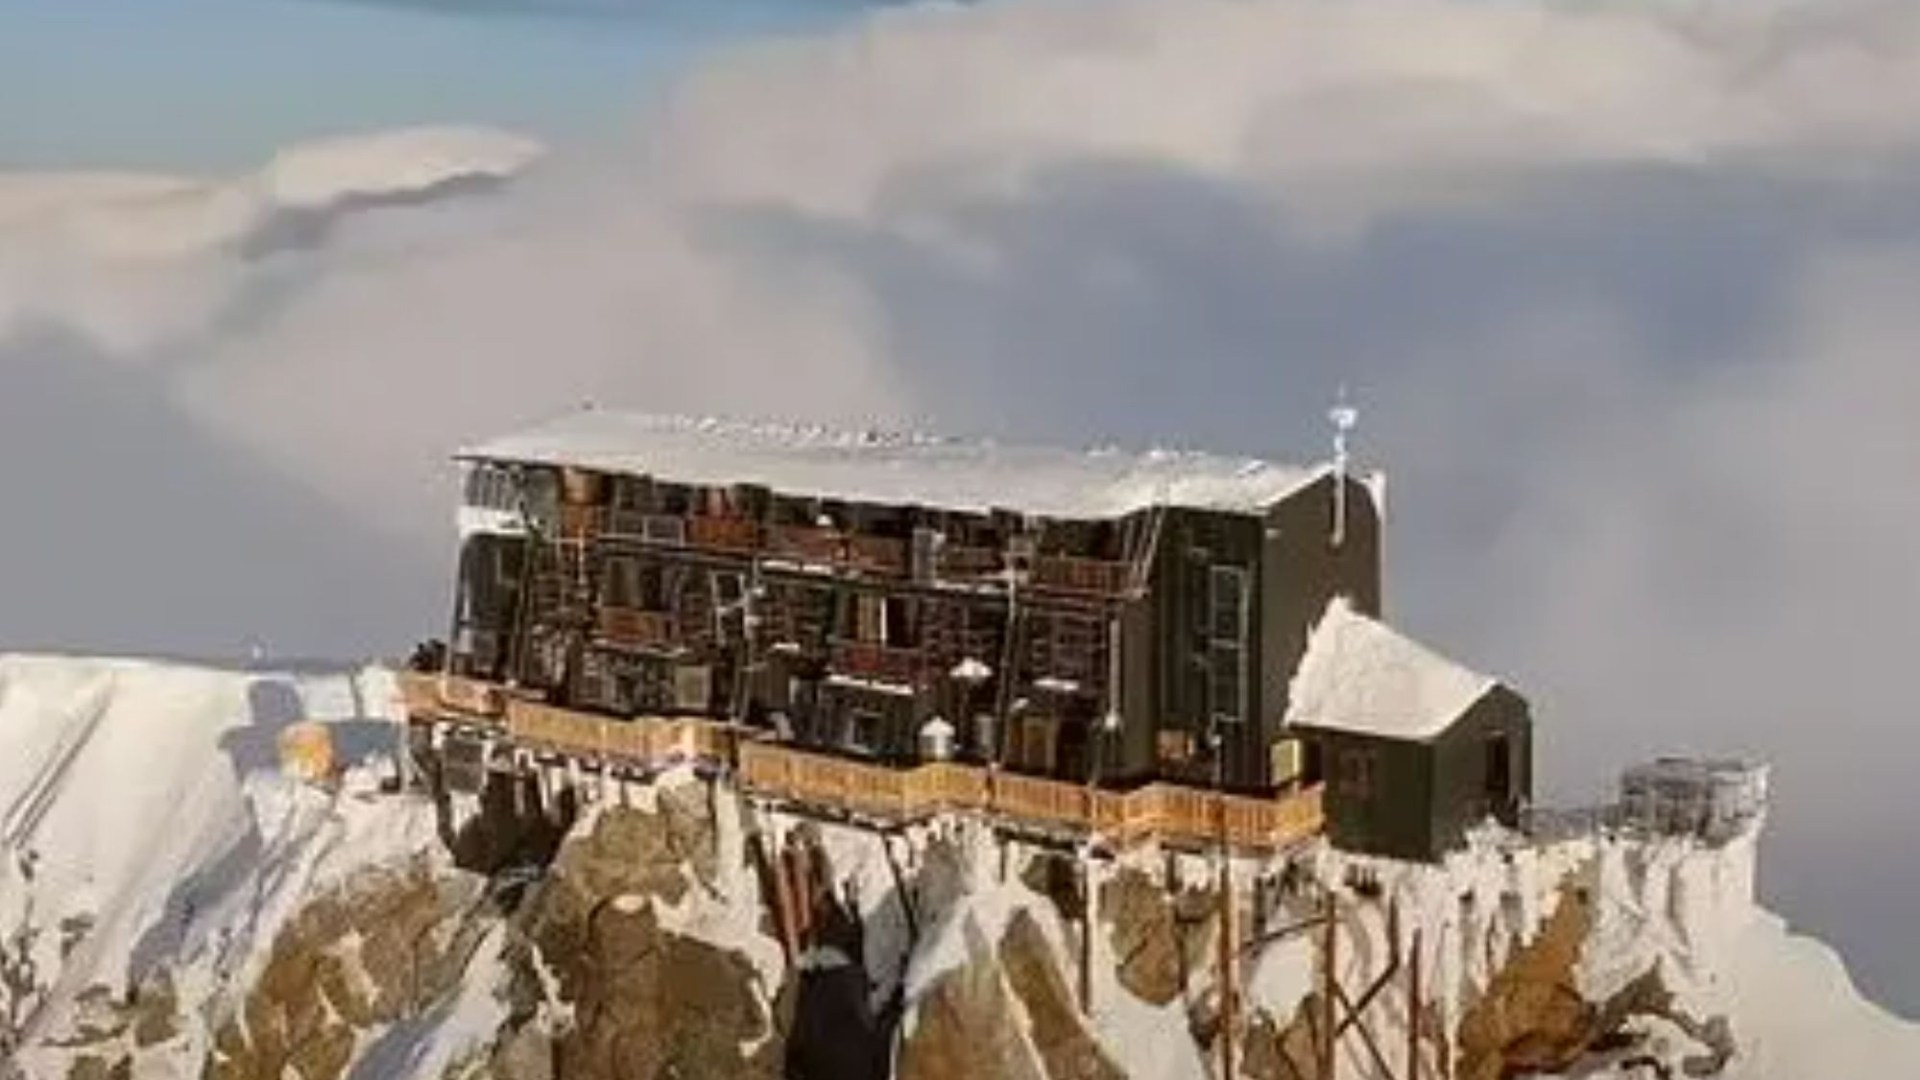 World’s most remote hotel ‘Margherita Hut’ located 15,000ft up mountain requires 5hr trek – but it’s worth it for view [Video]